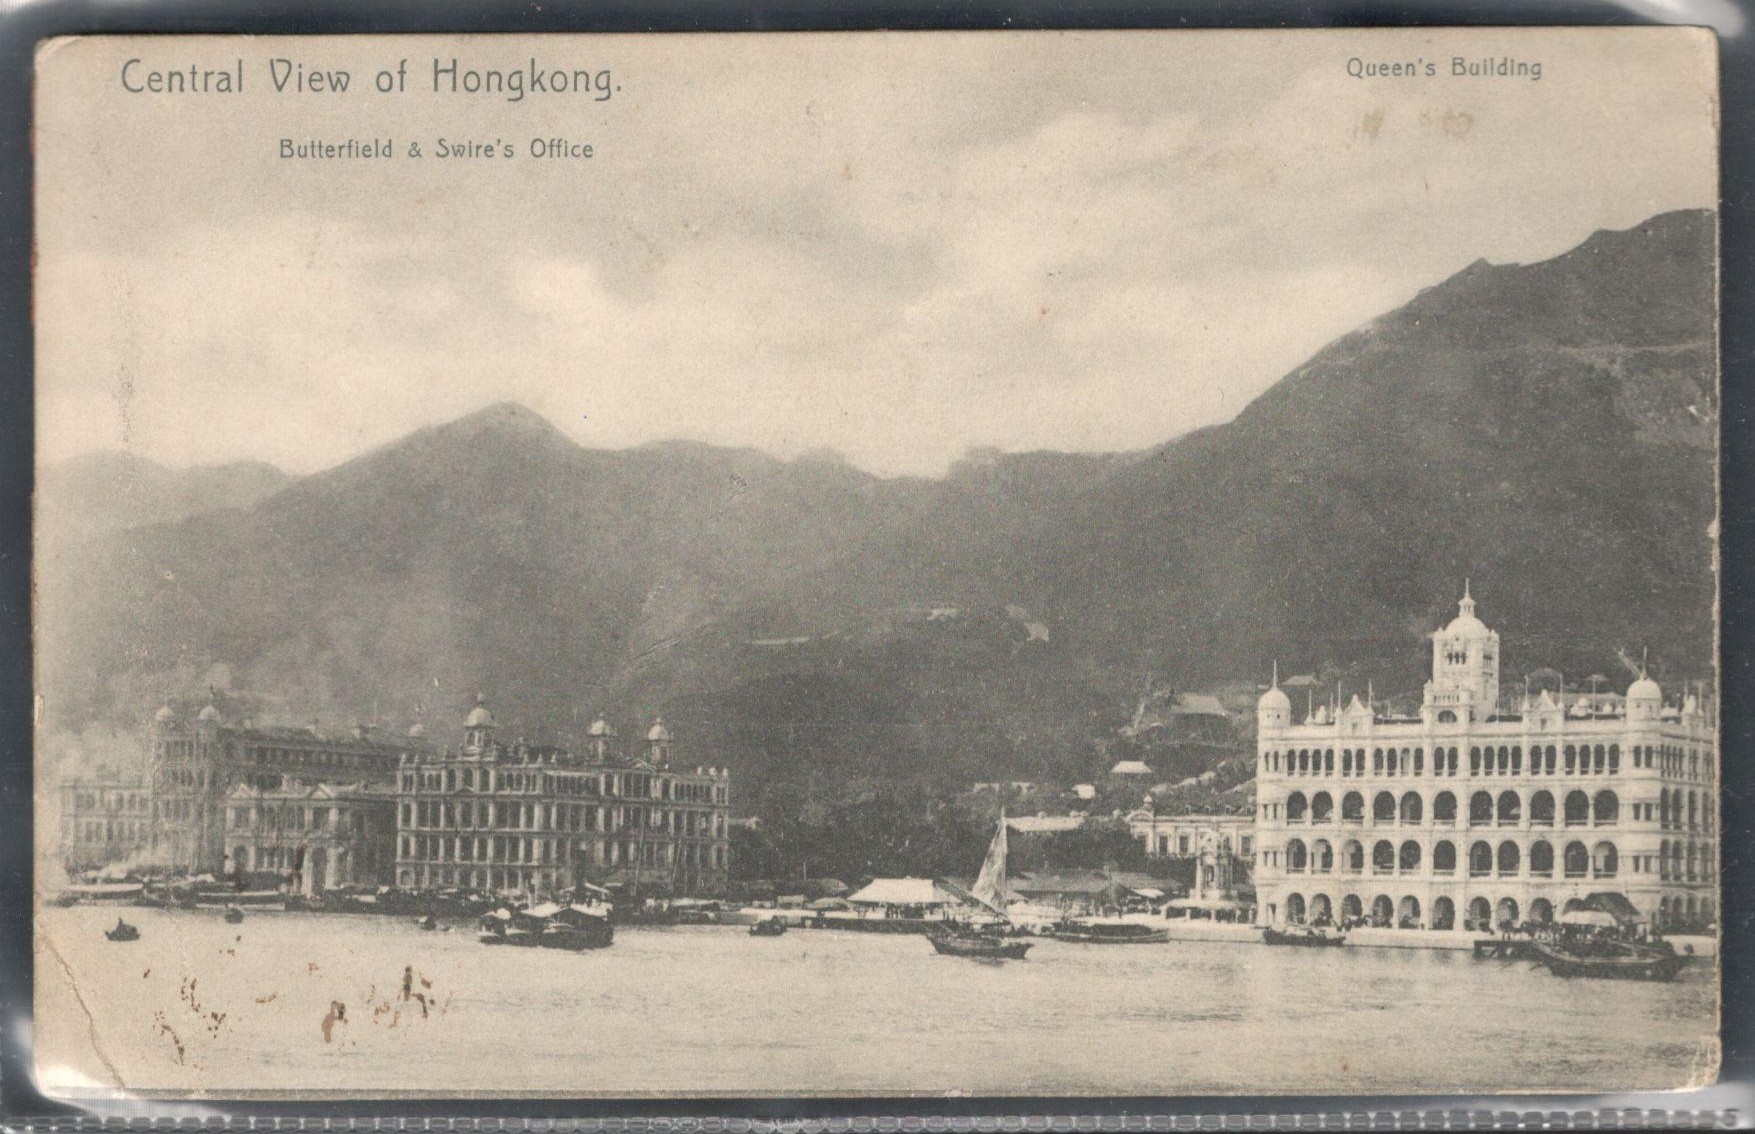 PICTURE POSTCARD OF CENTRAL VIEW OF HONGKONG BUTTERFIELD & SWIRE'S OFFICE - QUEEN'S BUILDING